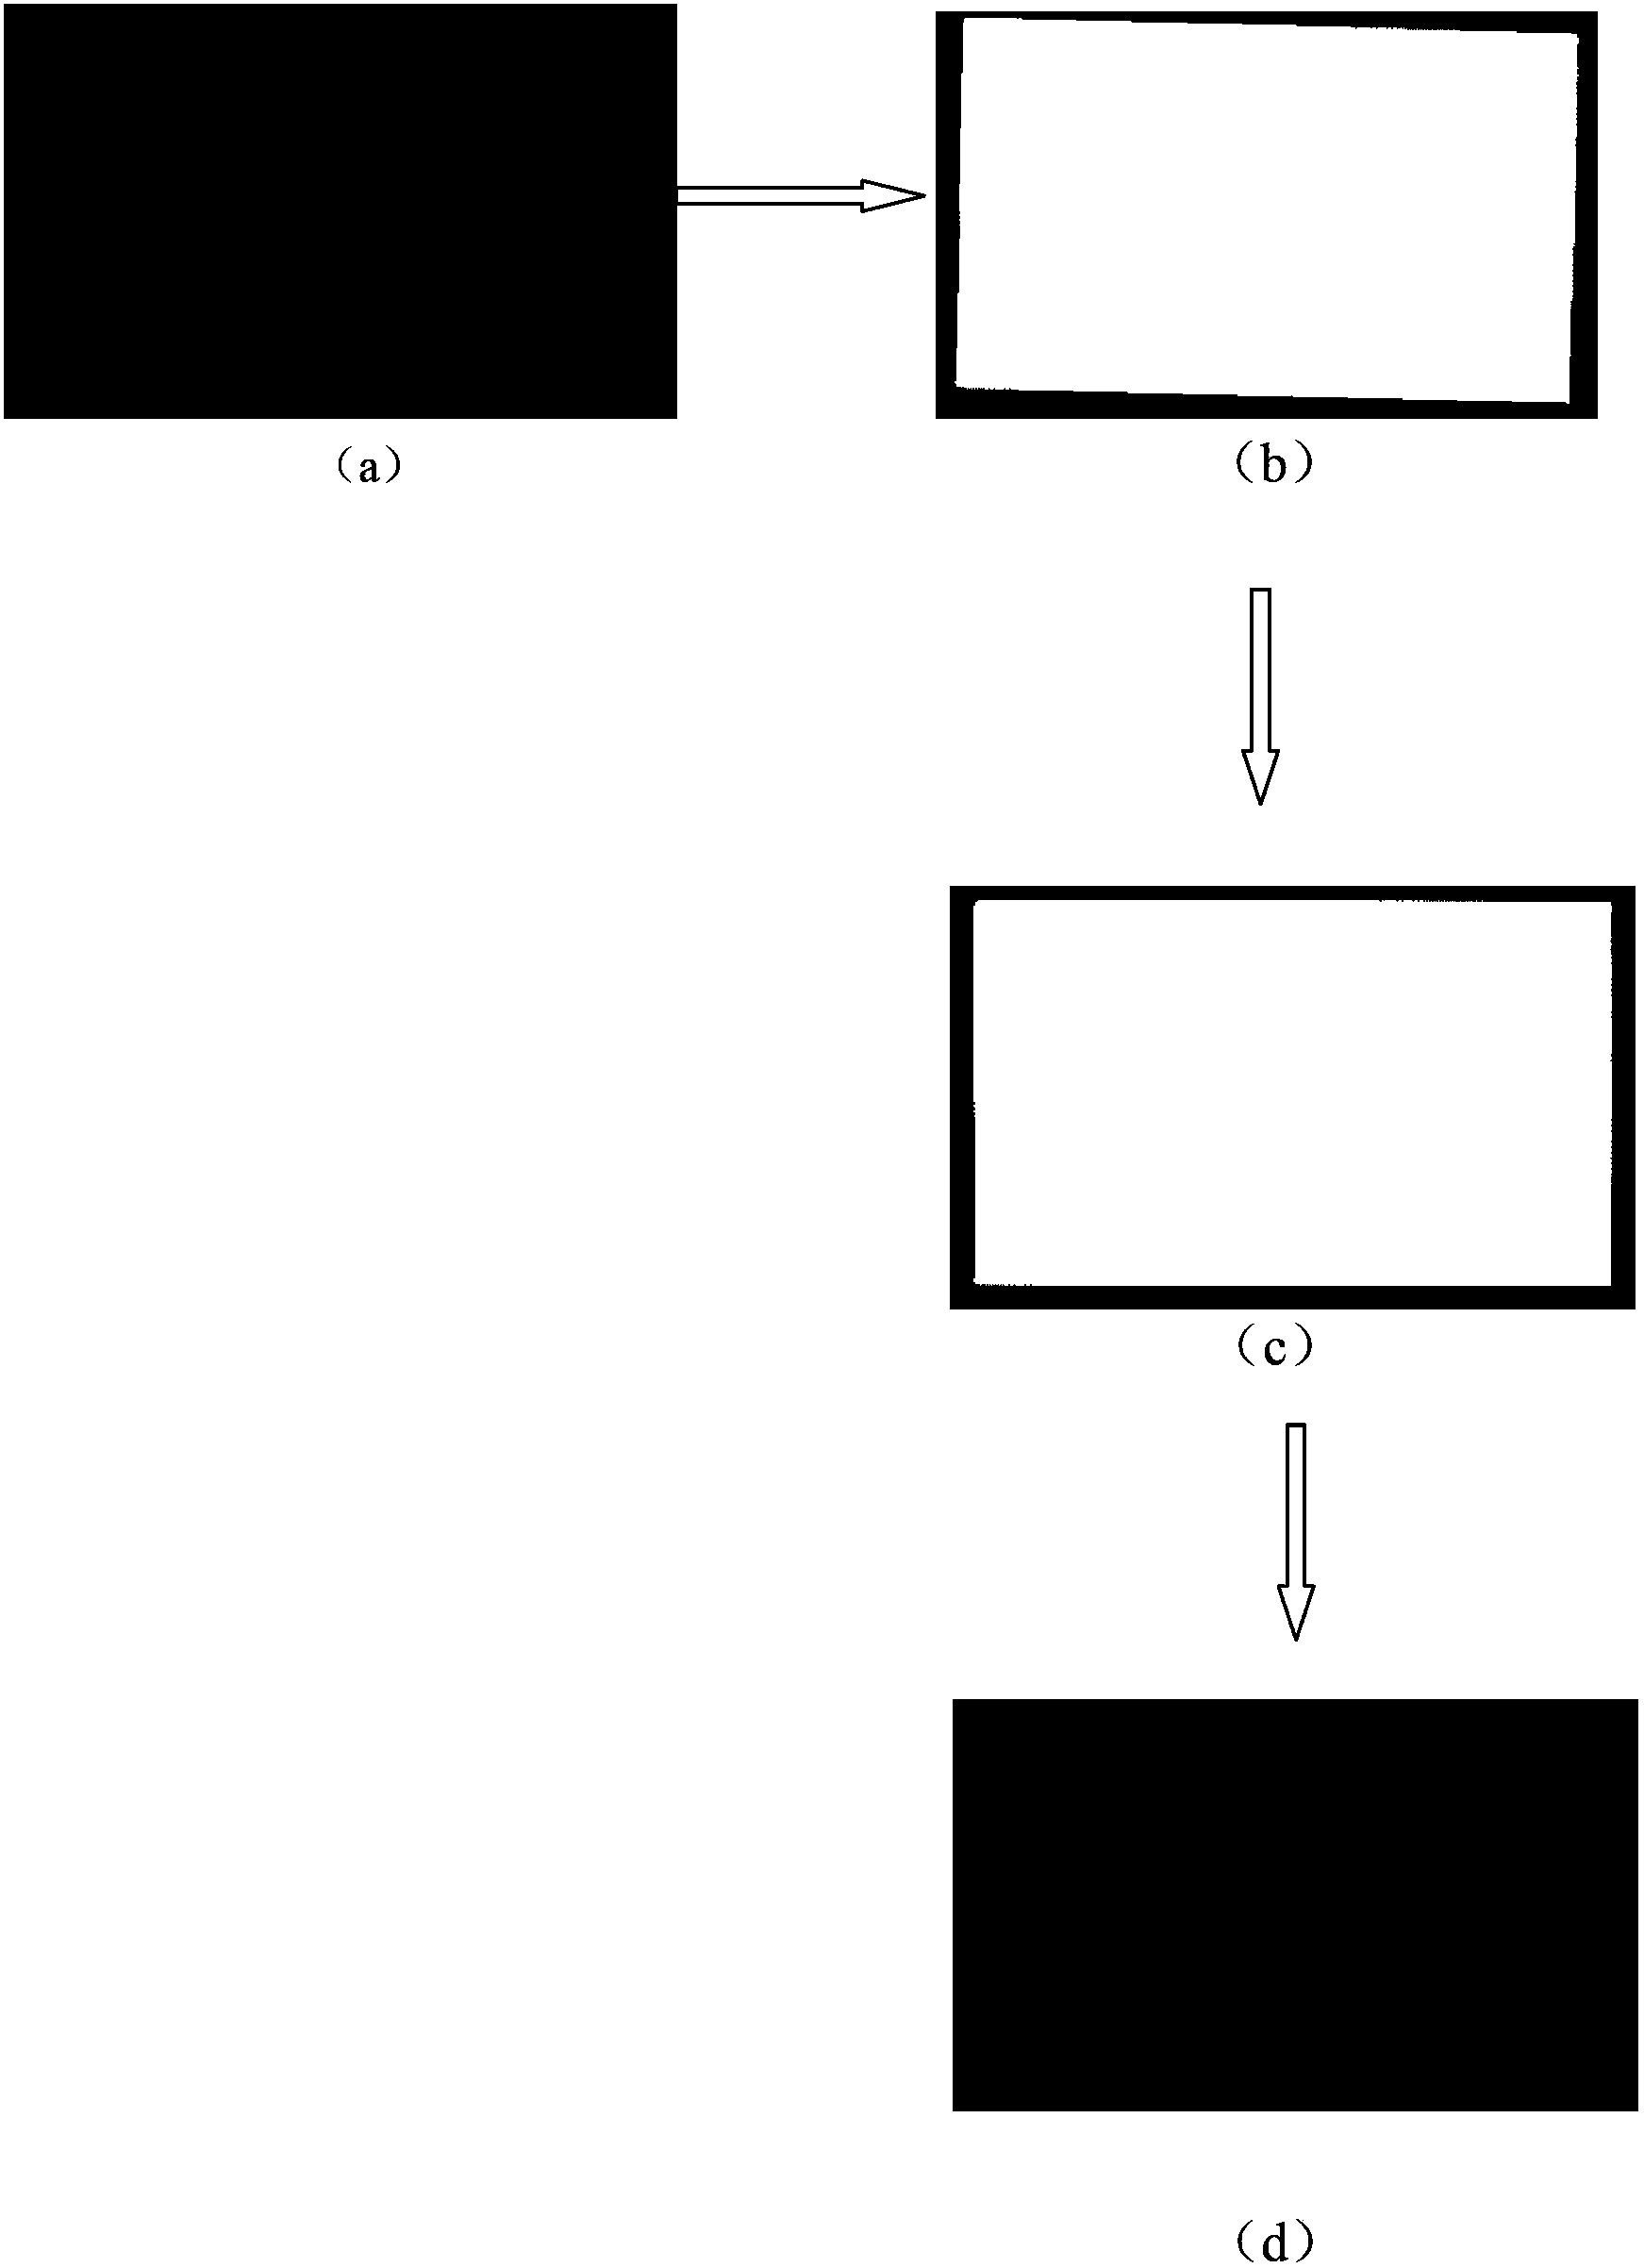 TFT-LCD lighting automatic optical inspection based image processing method